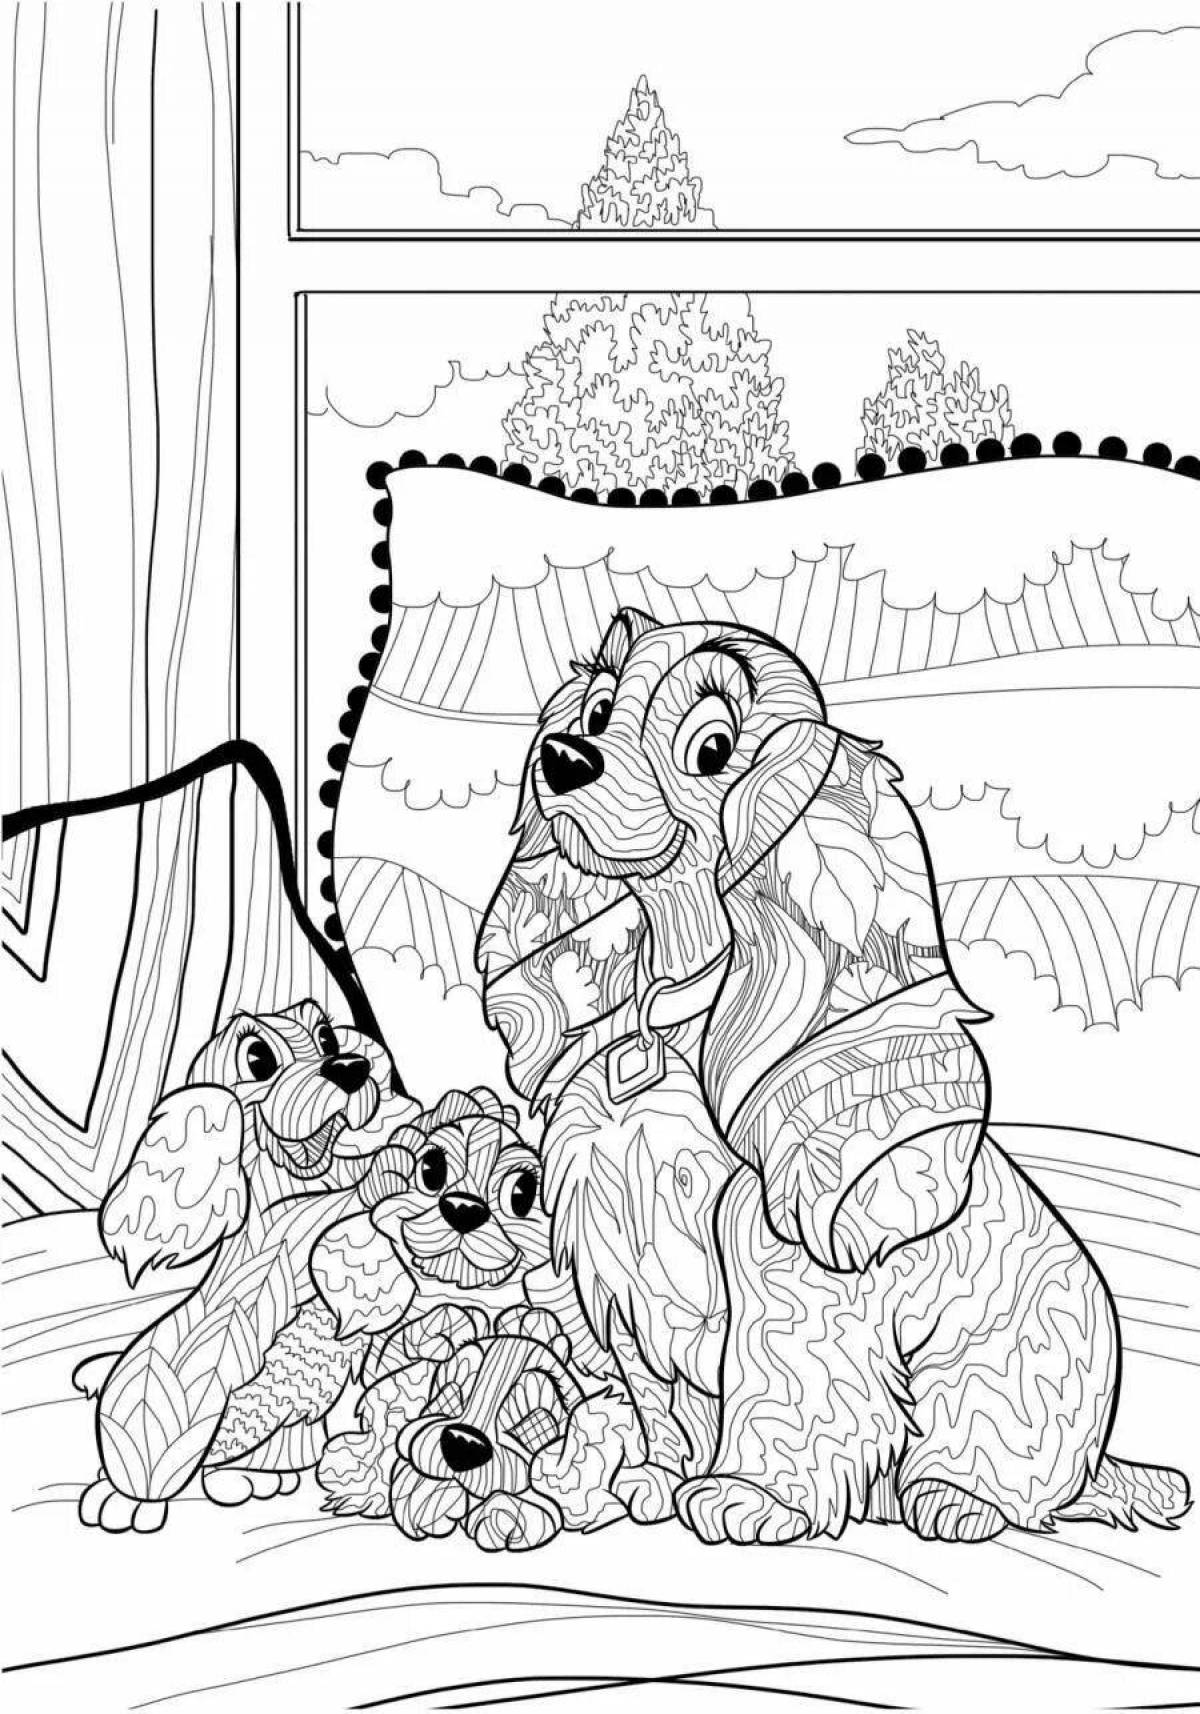 Echet playful coloring page